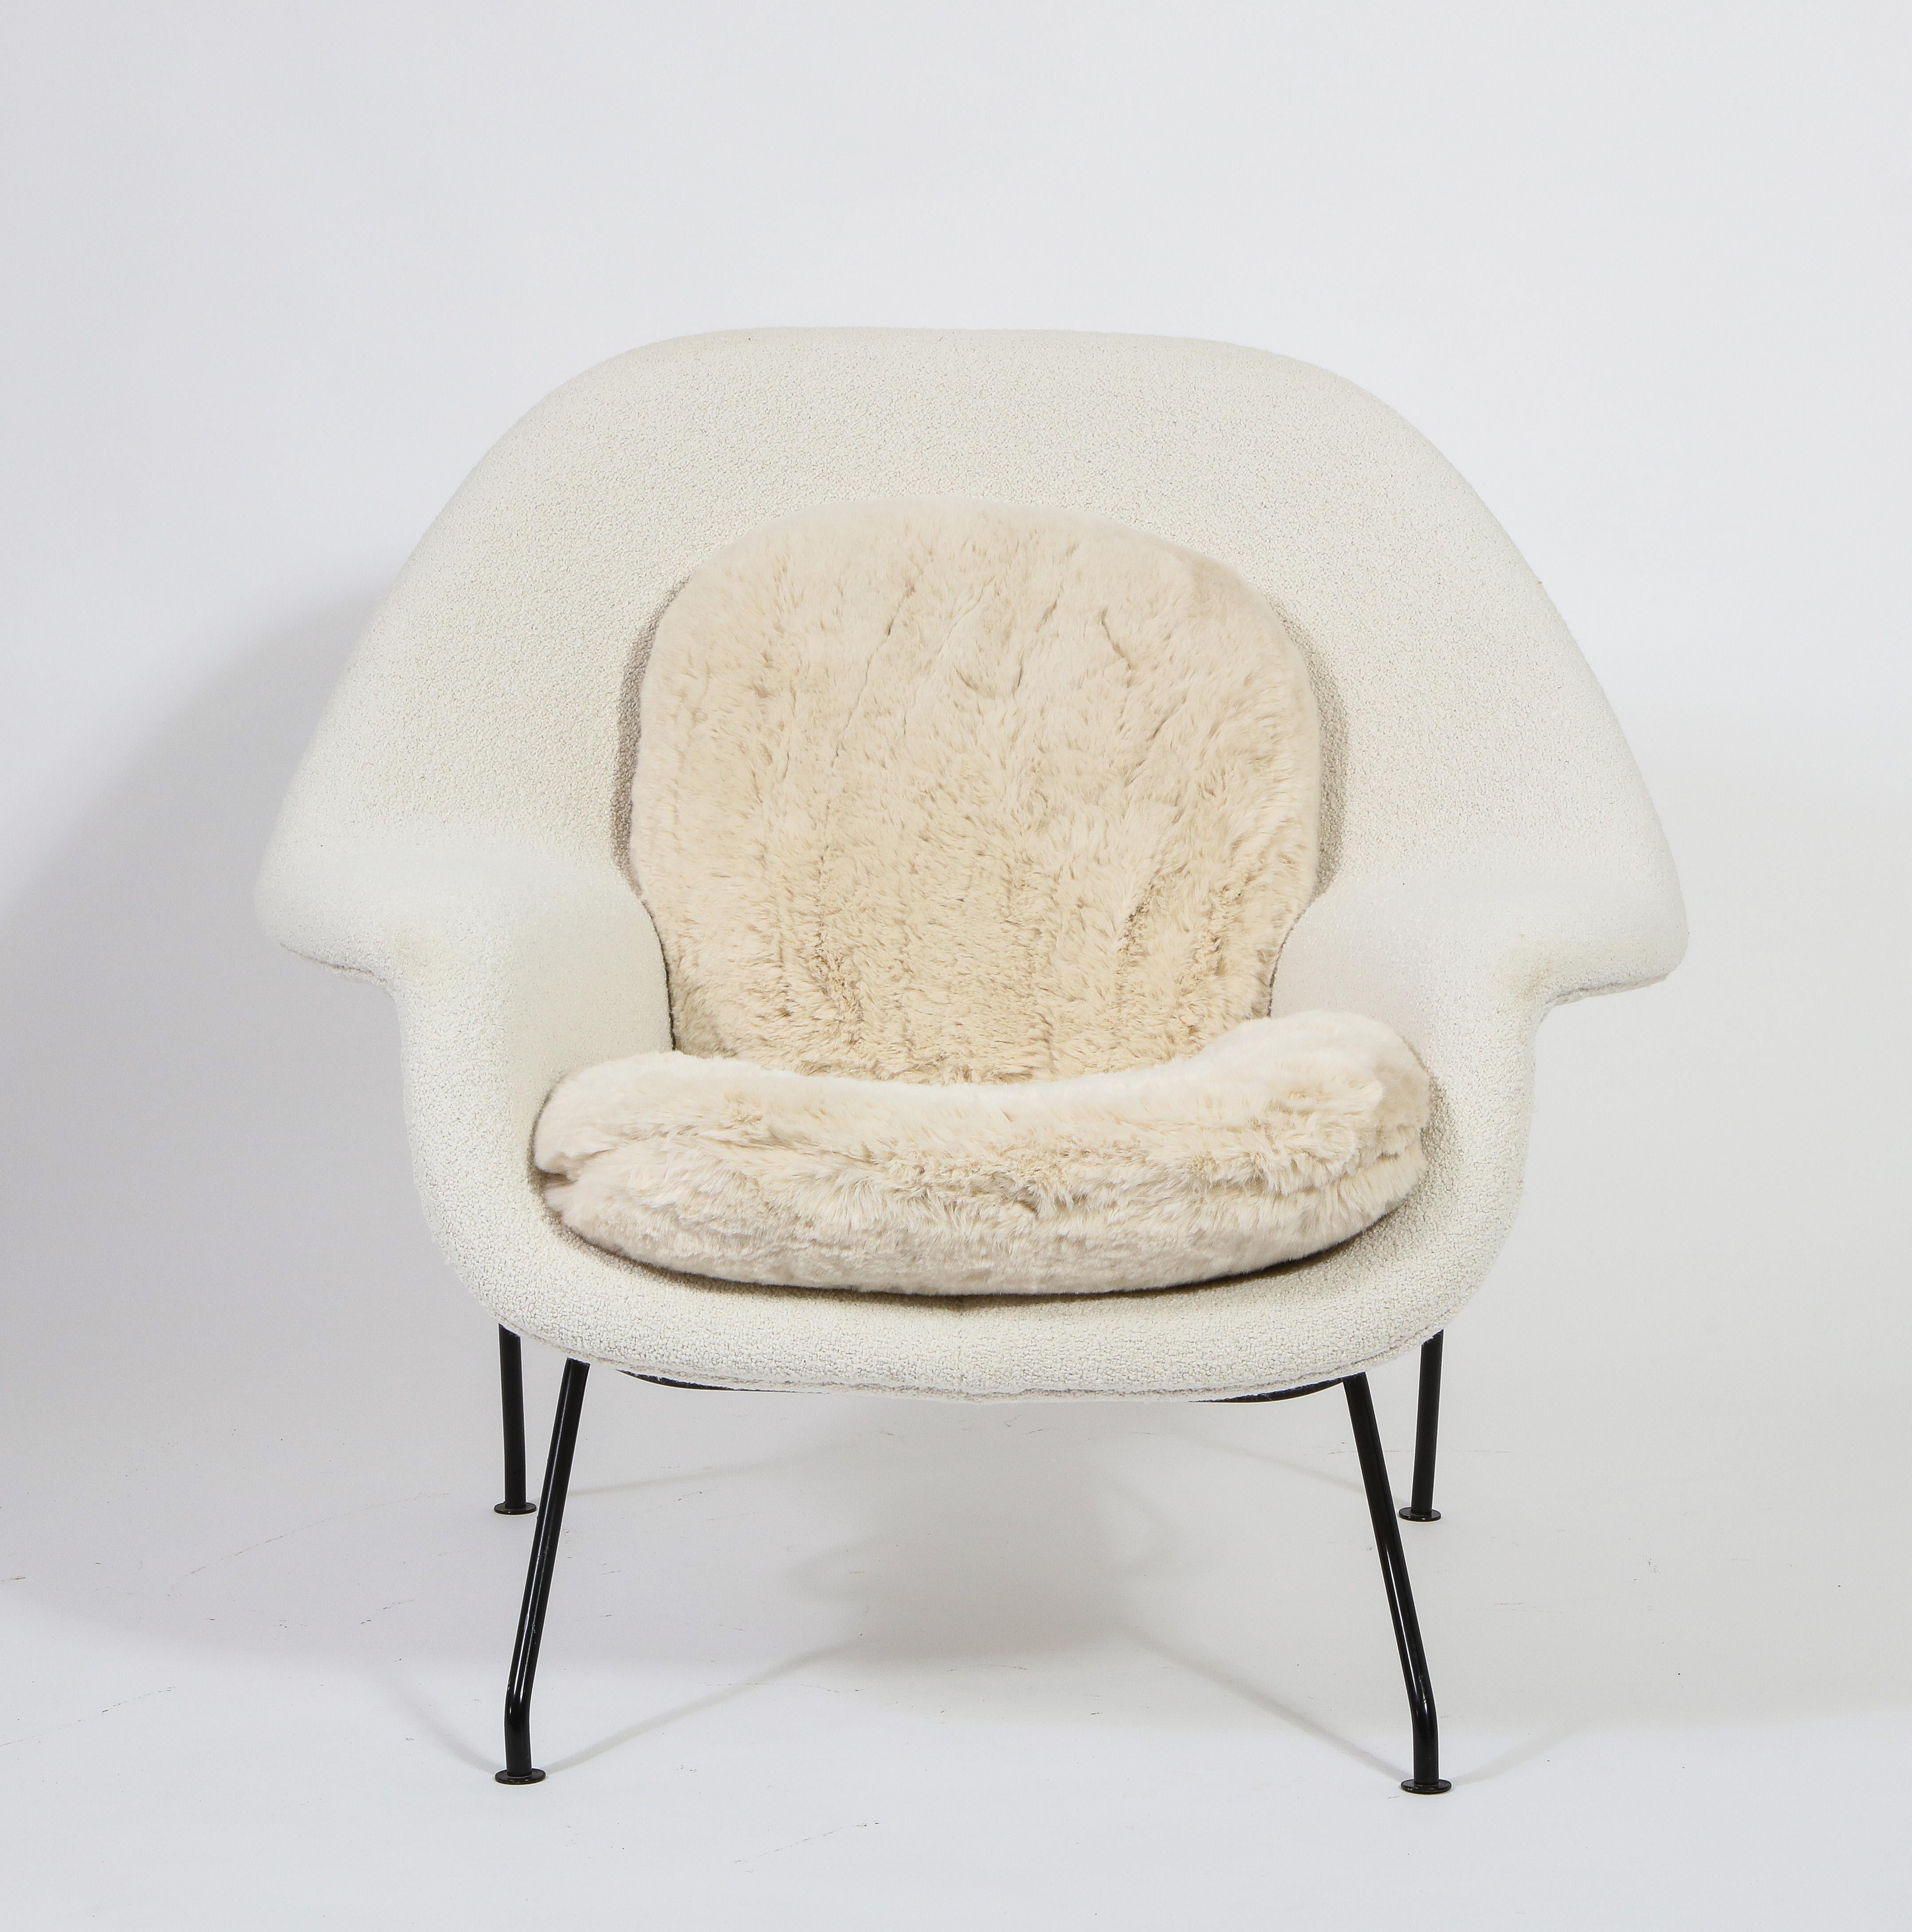 Eero Saarinen for Knoll Pair of Two-Tone Womb Chairs with Ottomans, USA 1955 In Excellent Condition For Sale In New York, NY